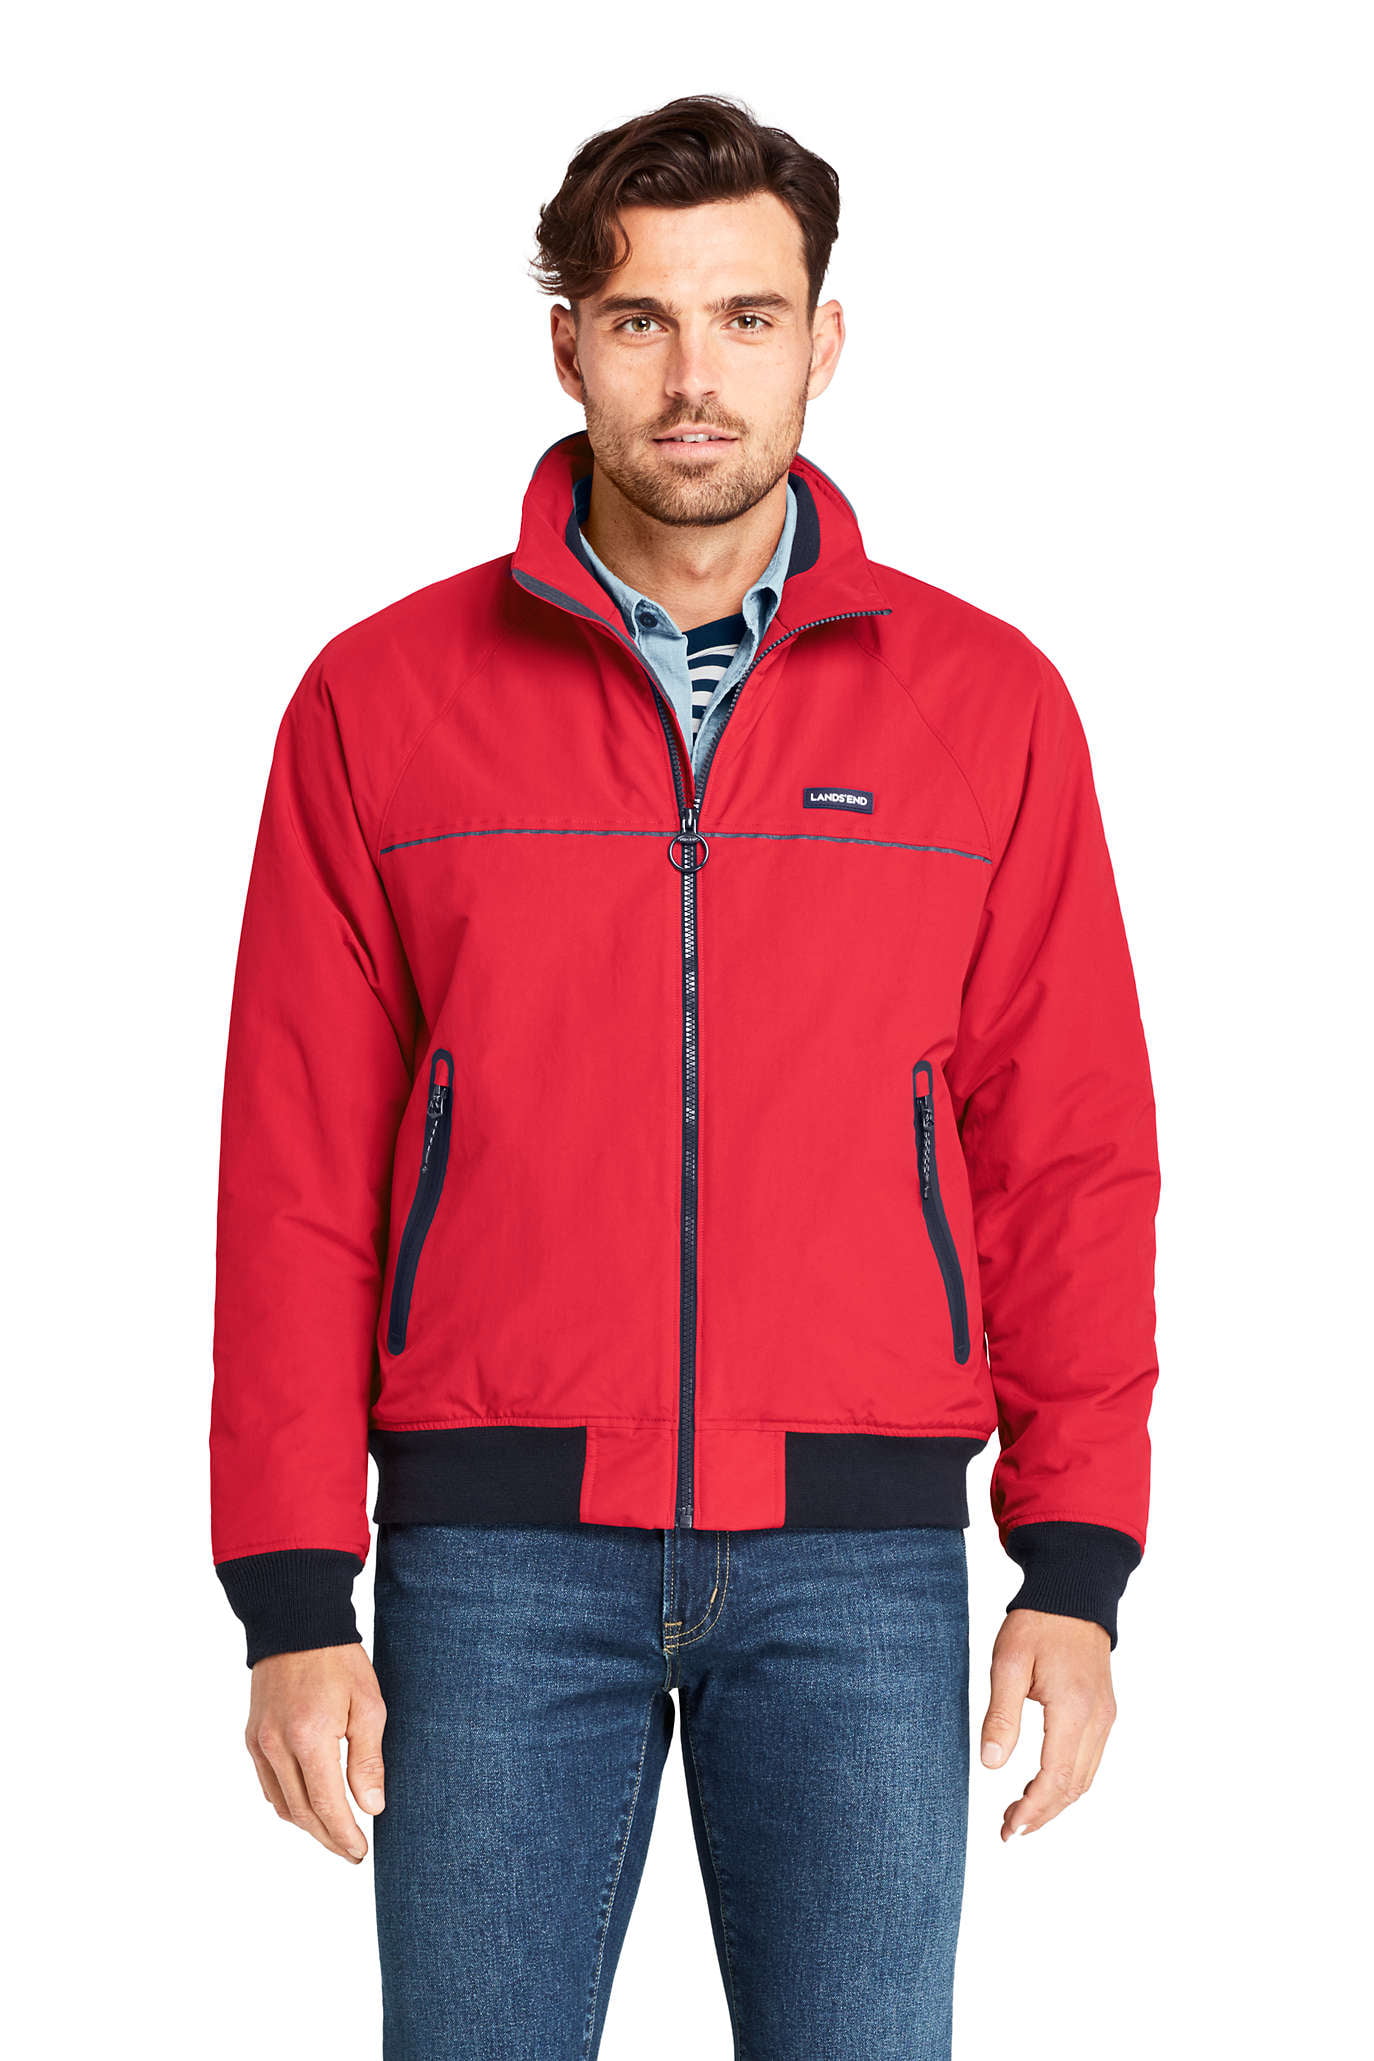 Lands End Mens Classic Squall Jacket